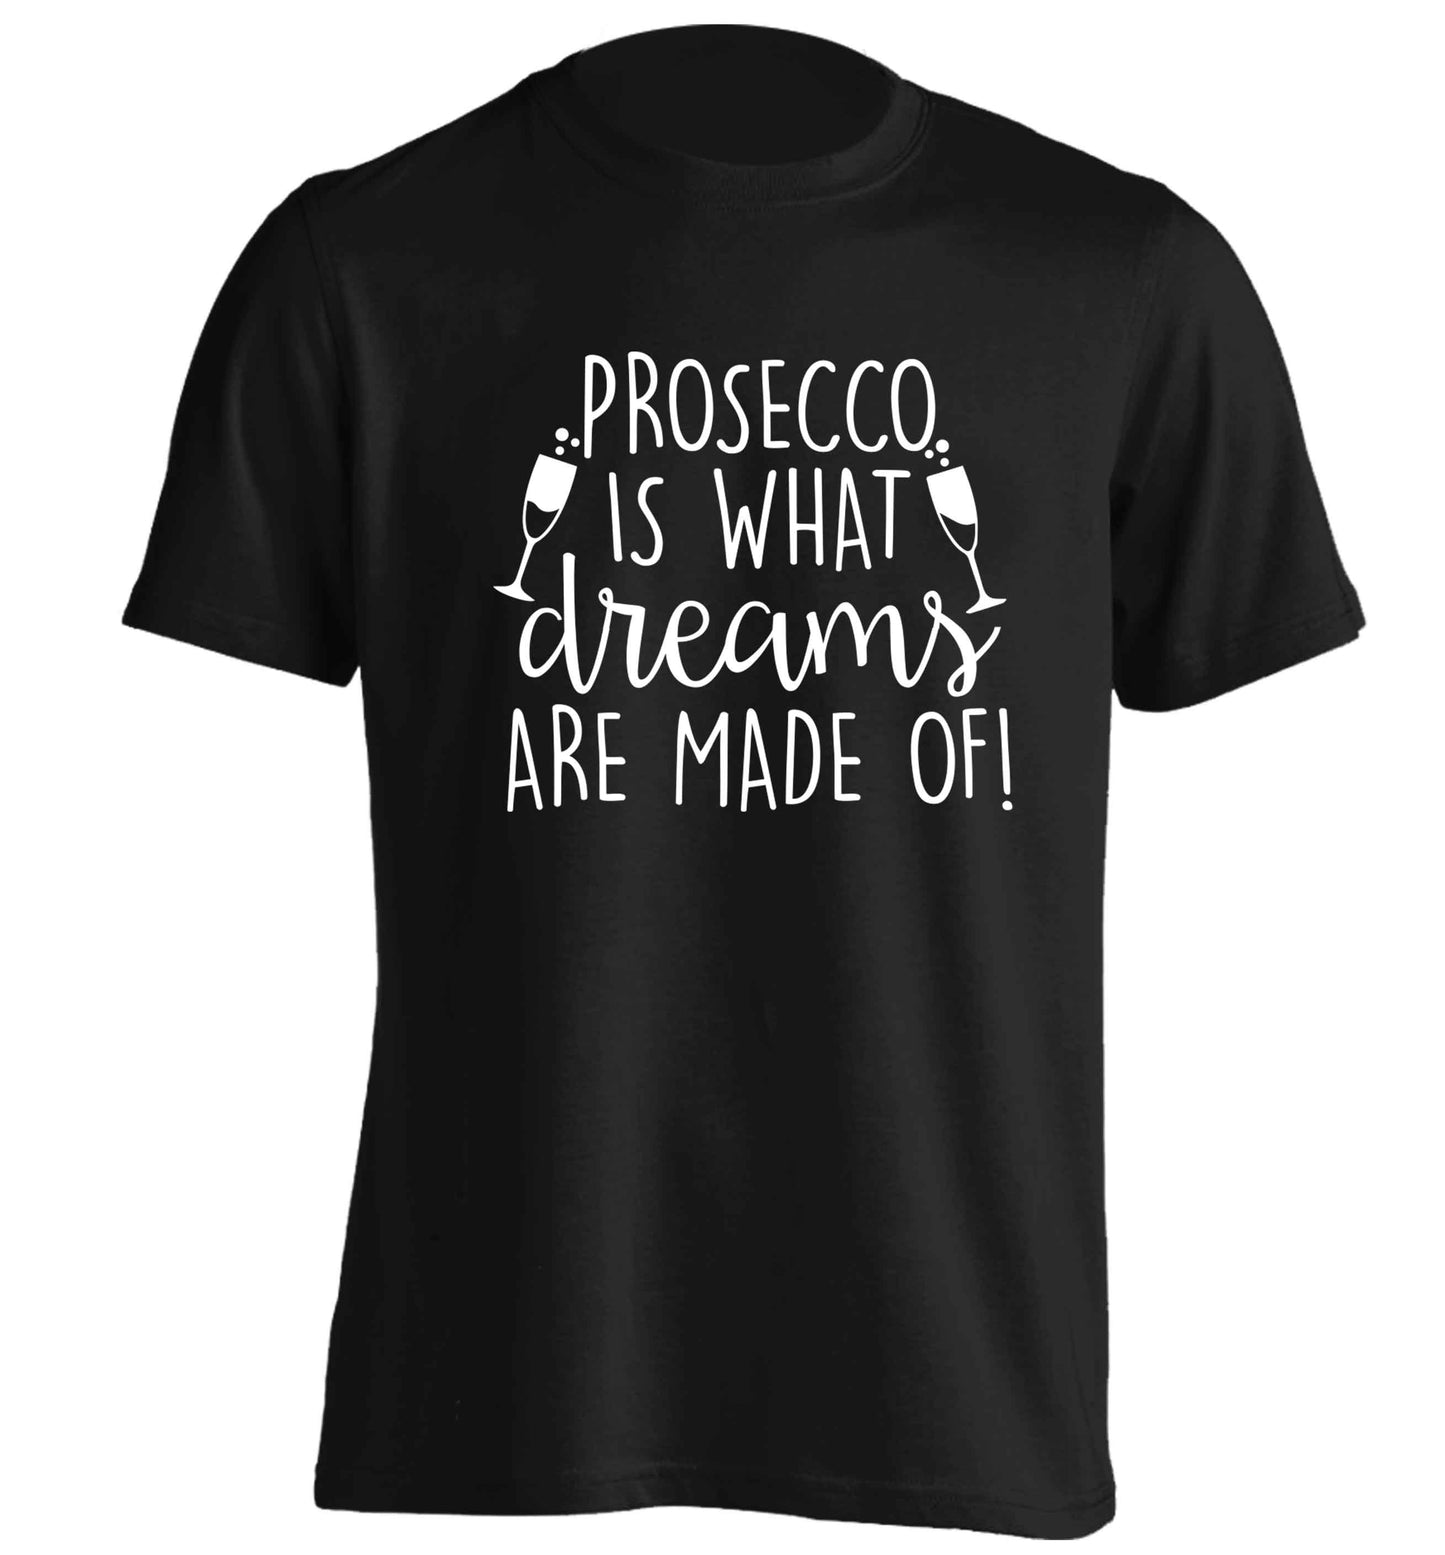 Prosecco is what dreams are made of adults unisex black Tshirt 2XL